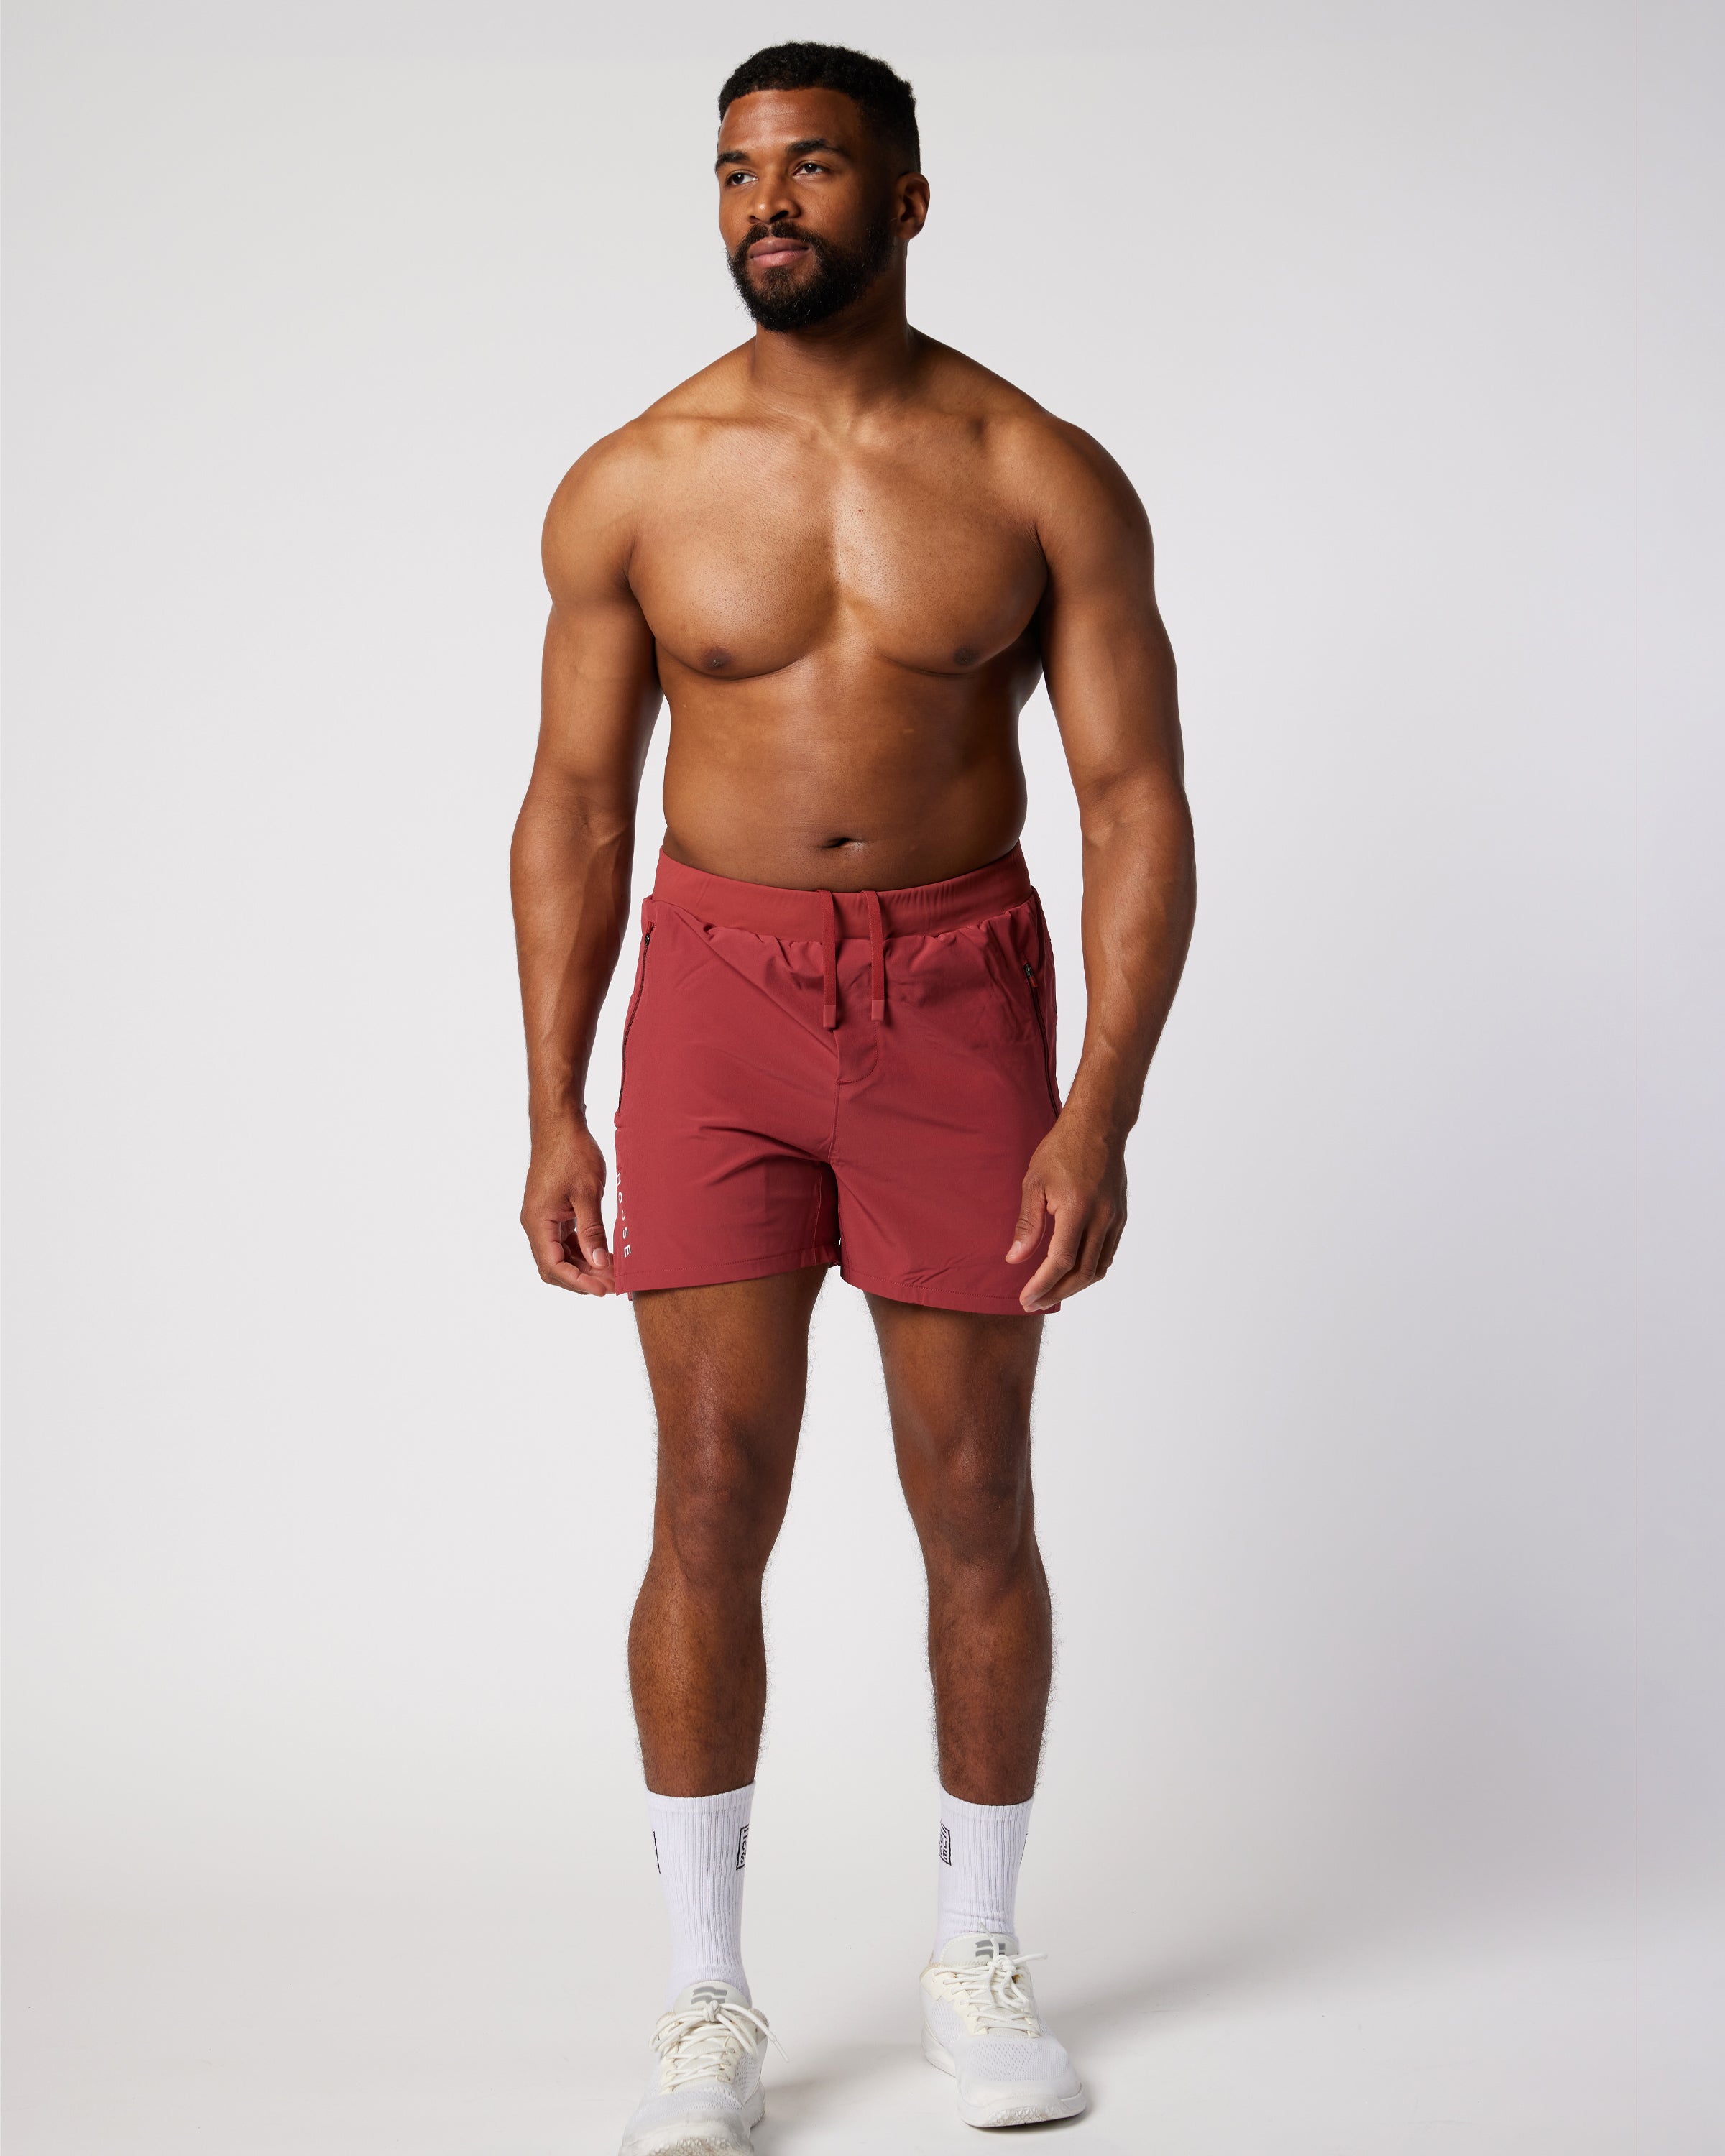 Mens unlined sports short in Mars Red